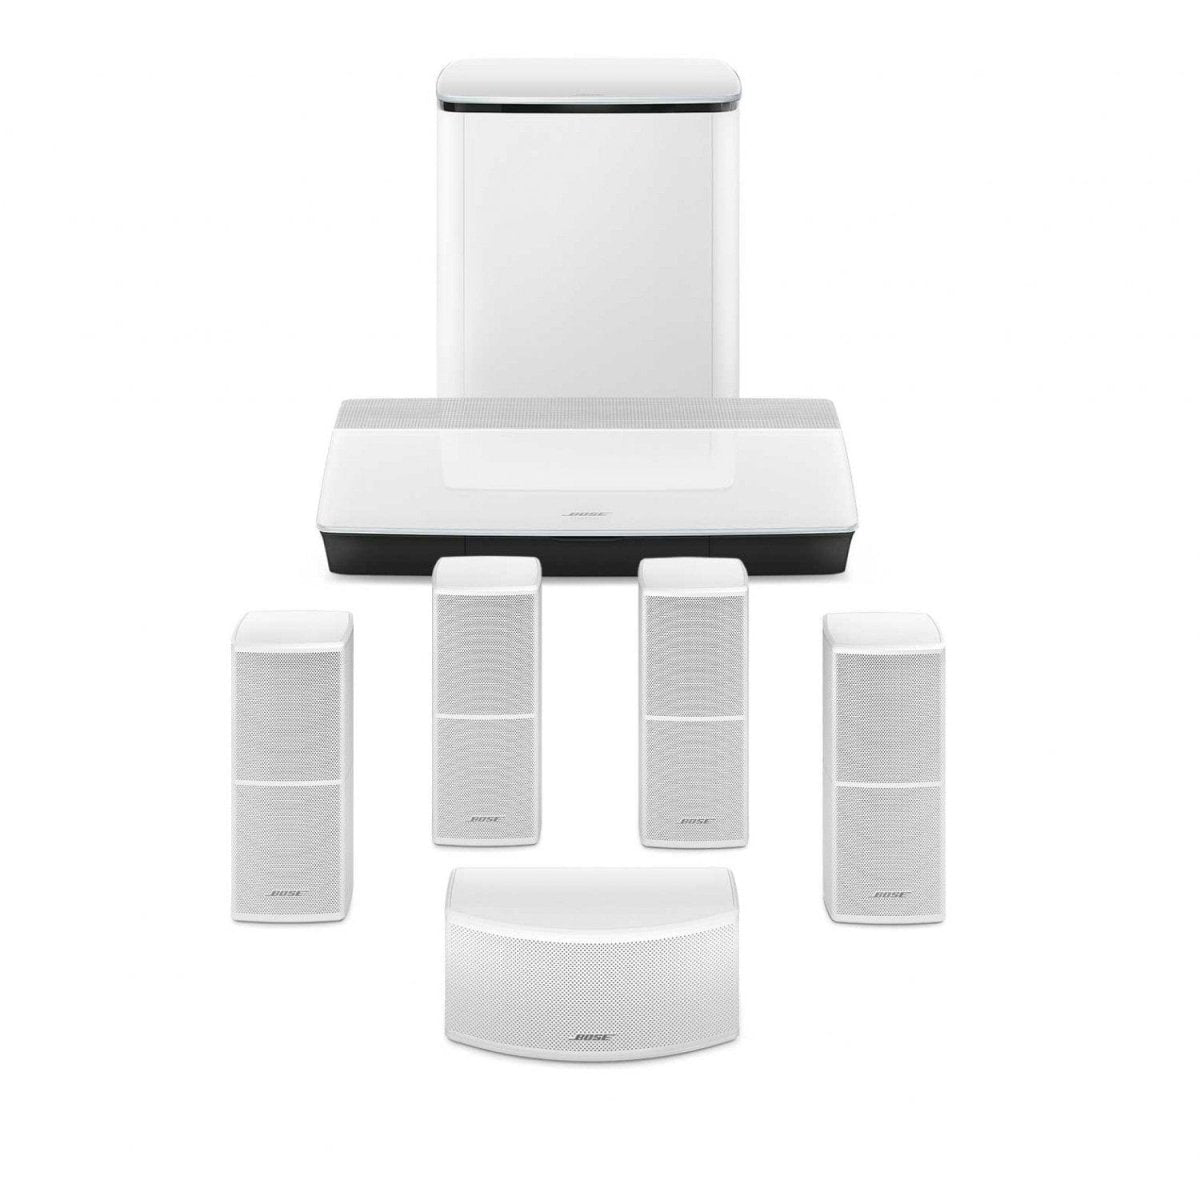 BOSE Lifestyle 600 5.1 Channel Home Theatre Speaker System - White (Manufacturer Refurbished) | Atlantic Electrics